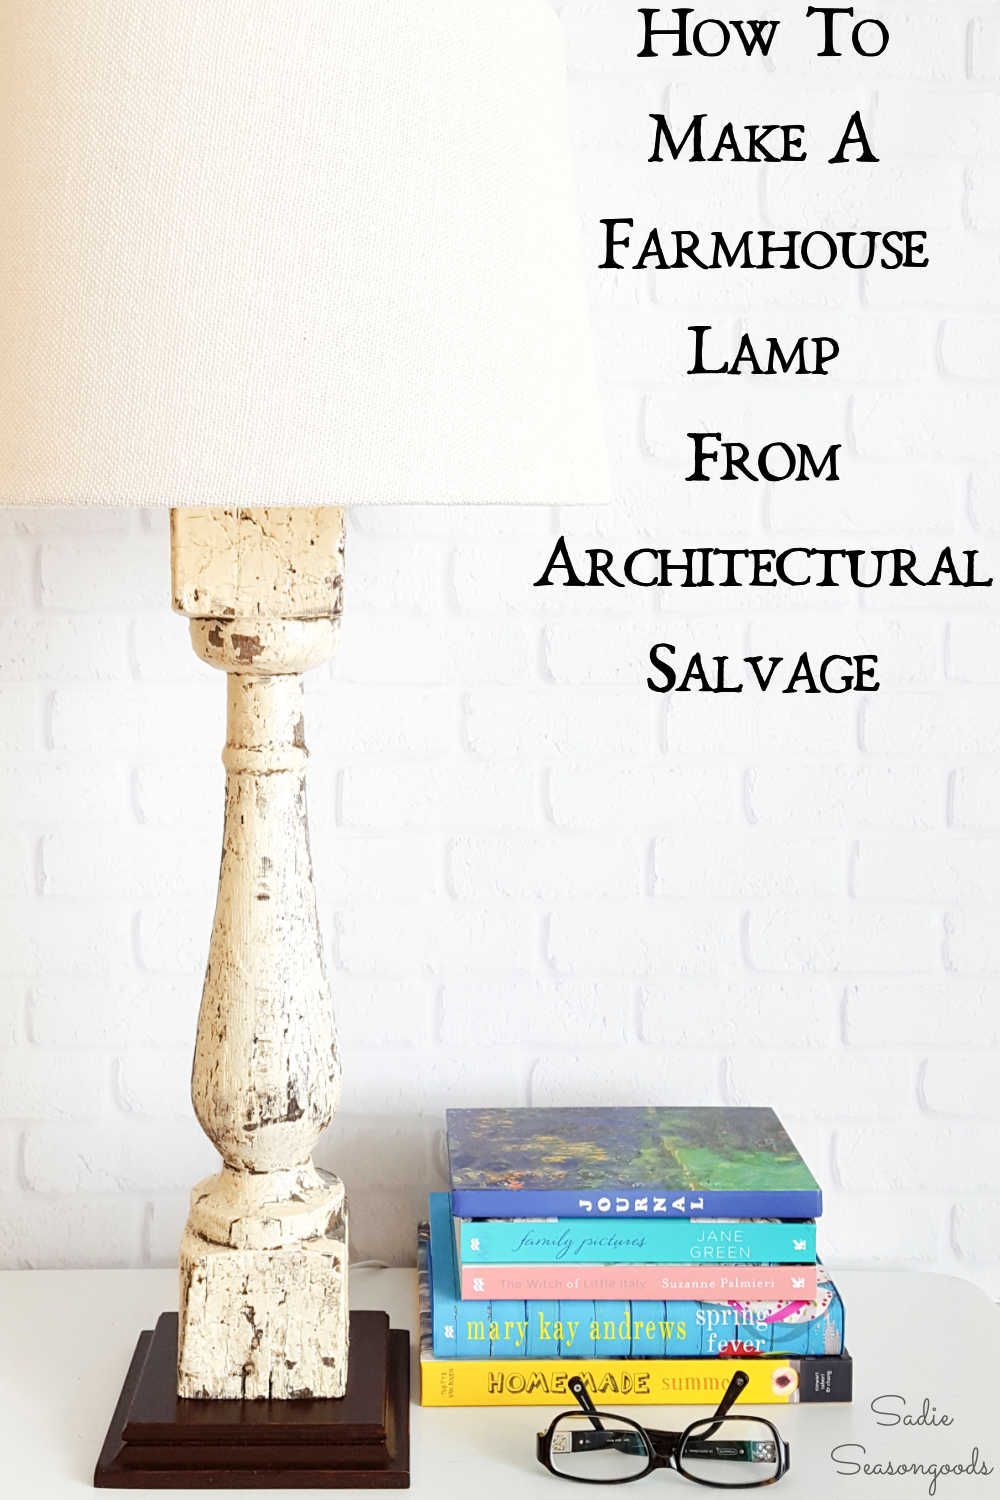 making a farmhouse lamp from architectural salvage